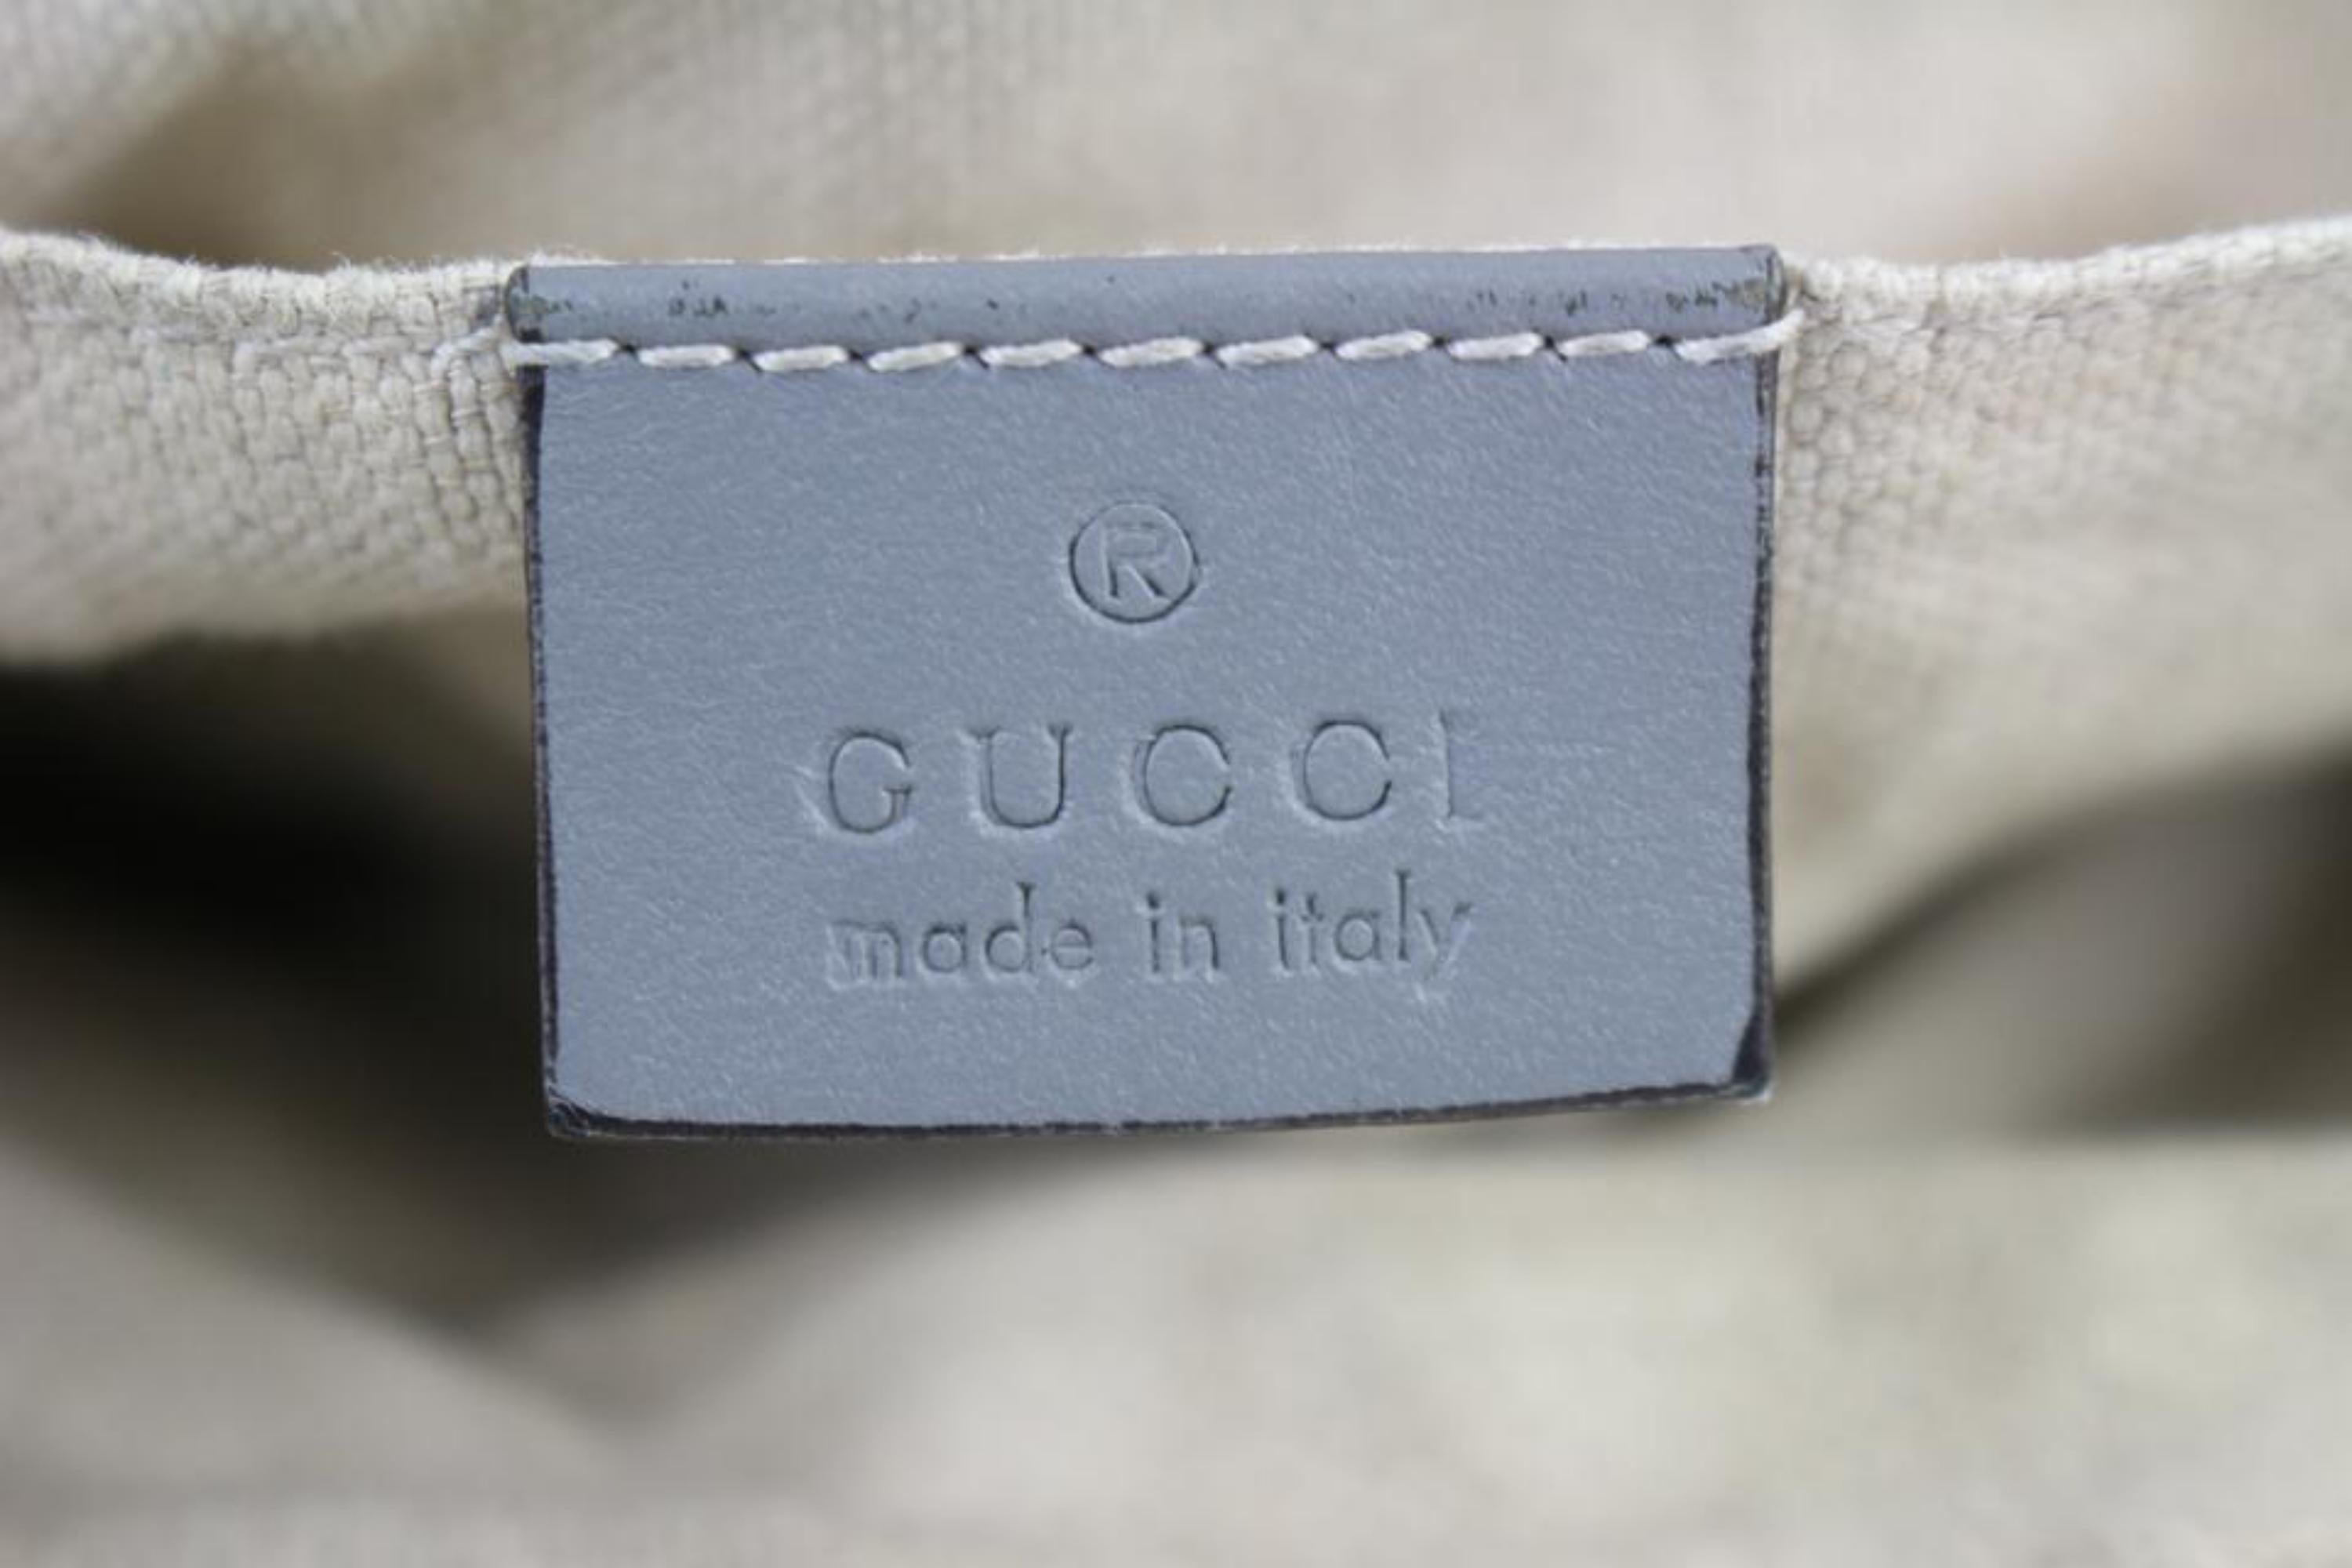 Gucci Supreme Slate Blue Fanny Pack Belt Waist Pouch 5gj0111 Grey Cross Body Bag In Good Condition For Sale In Forest Hills, NY